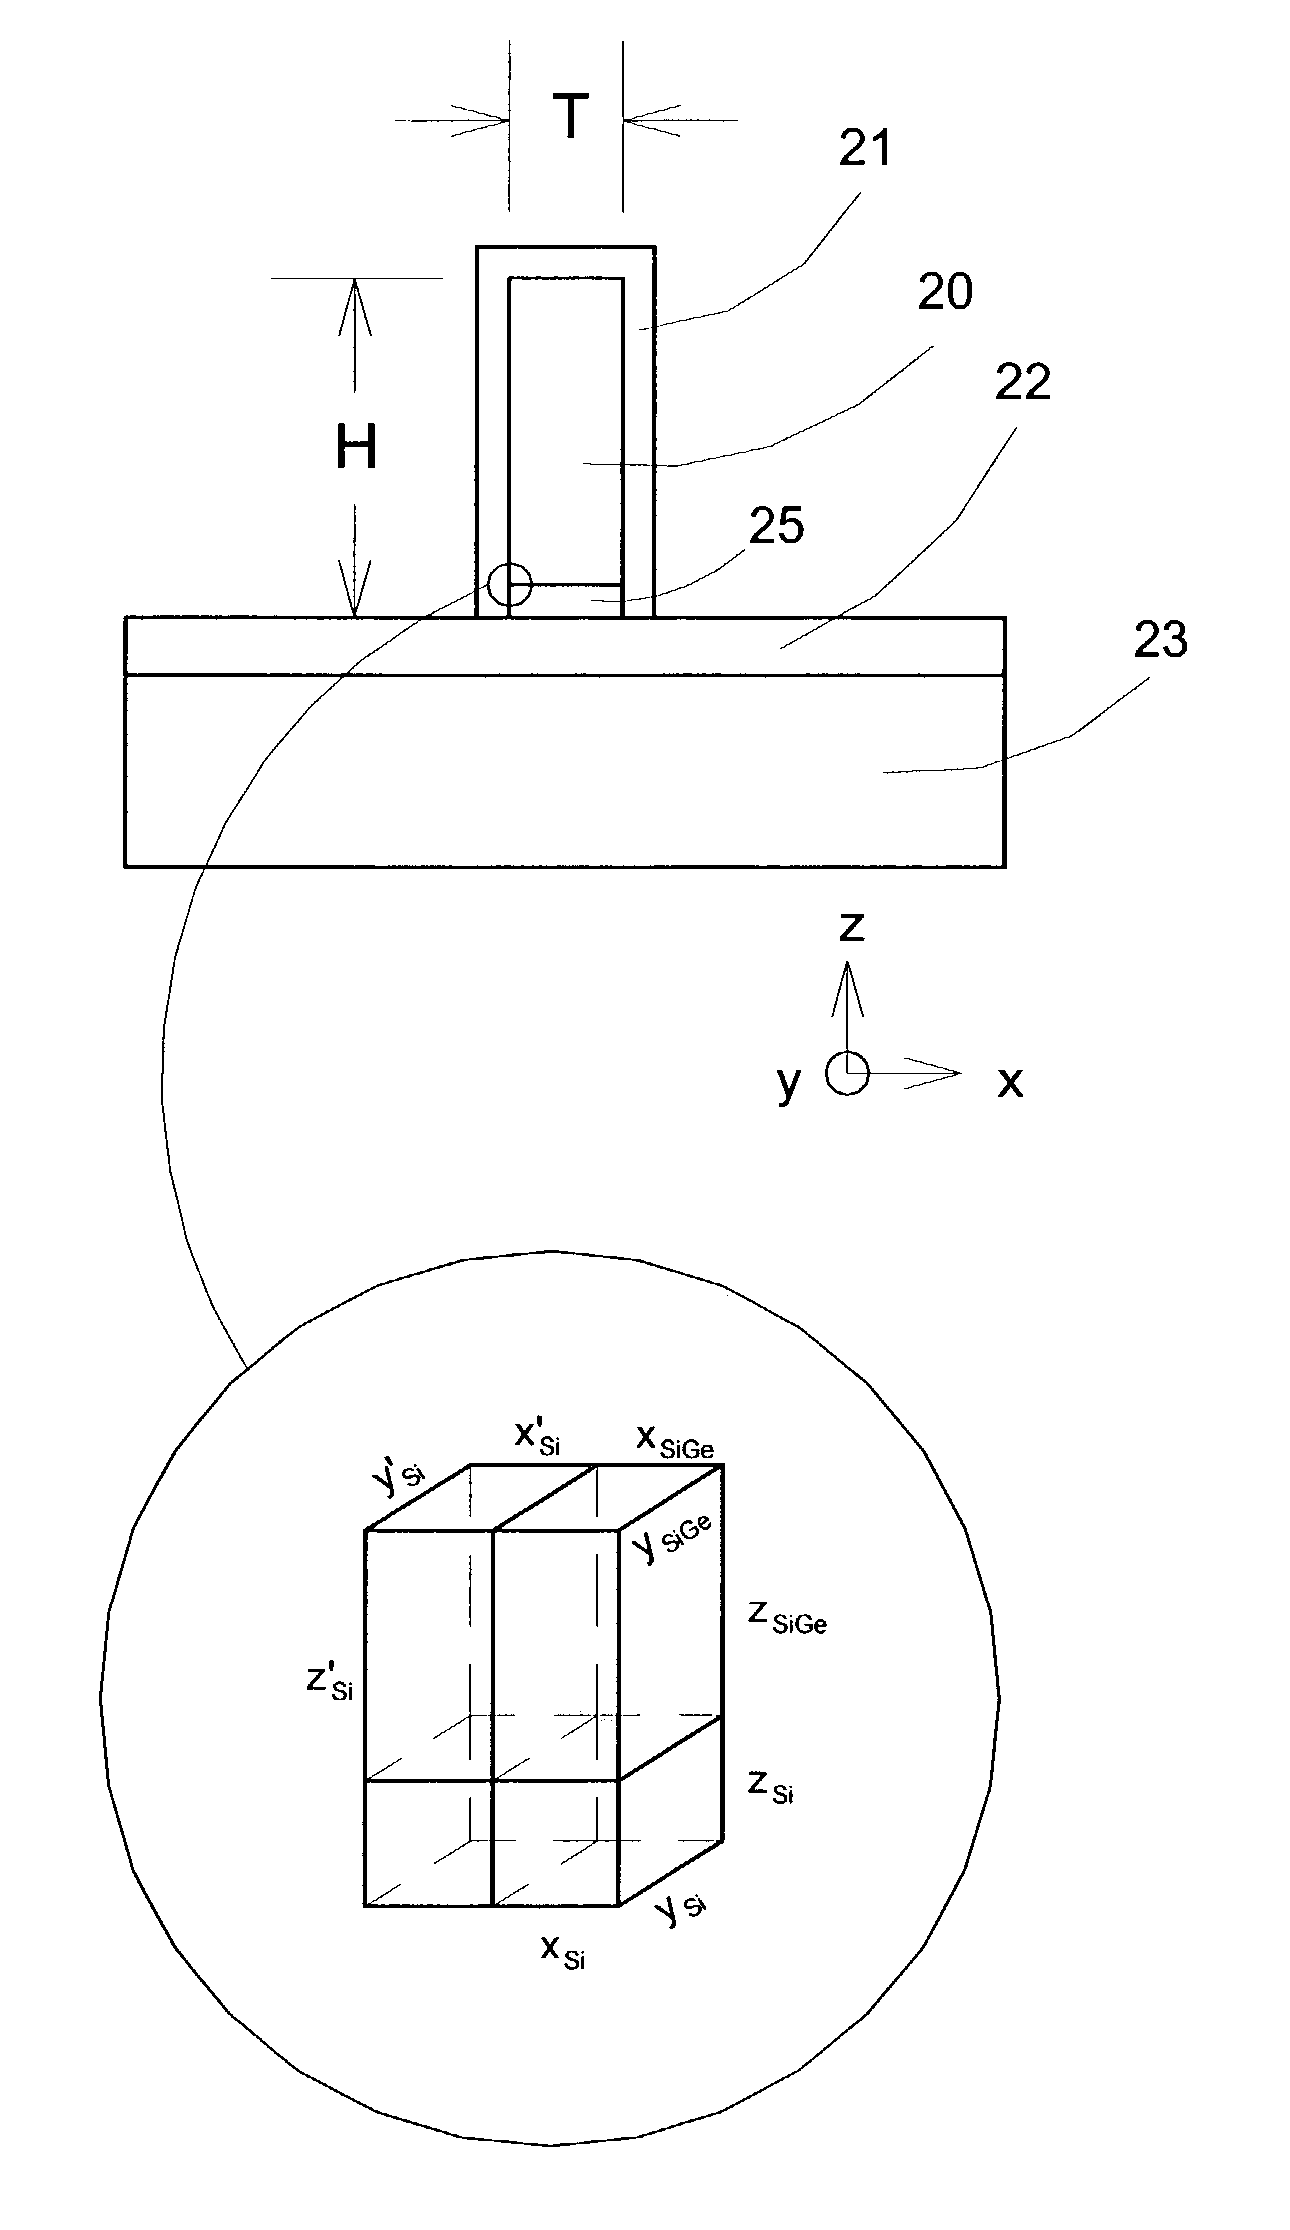 Strained silicon finFET device